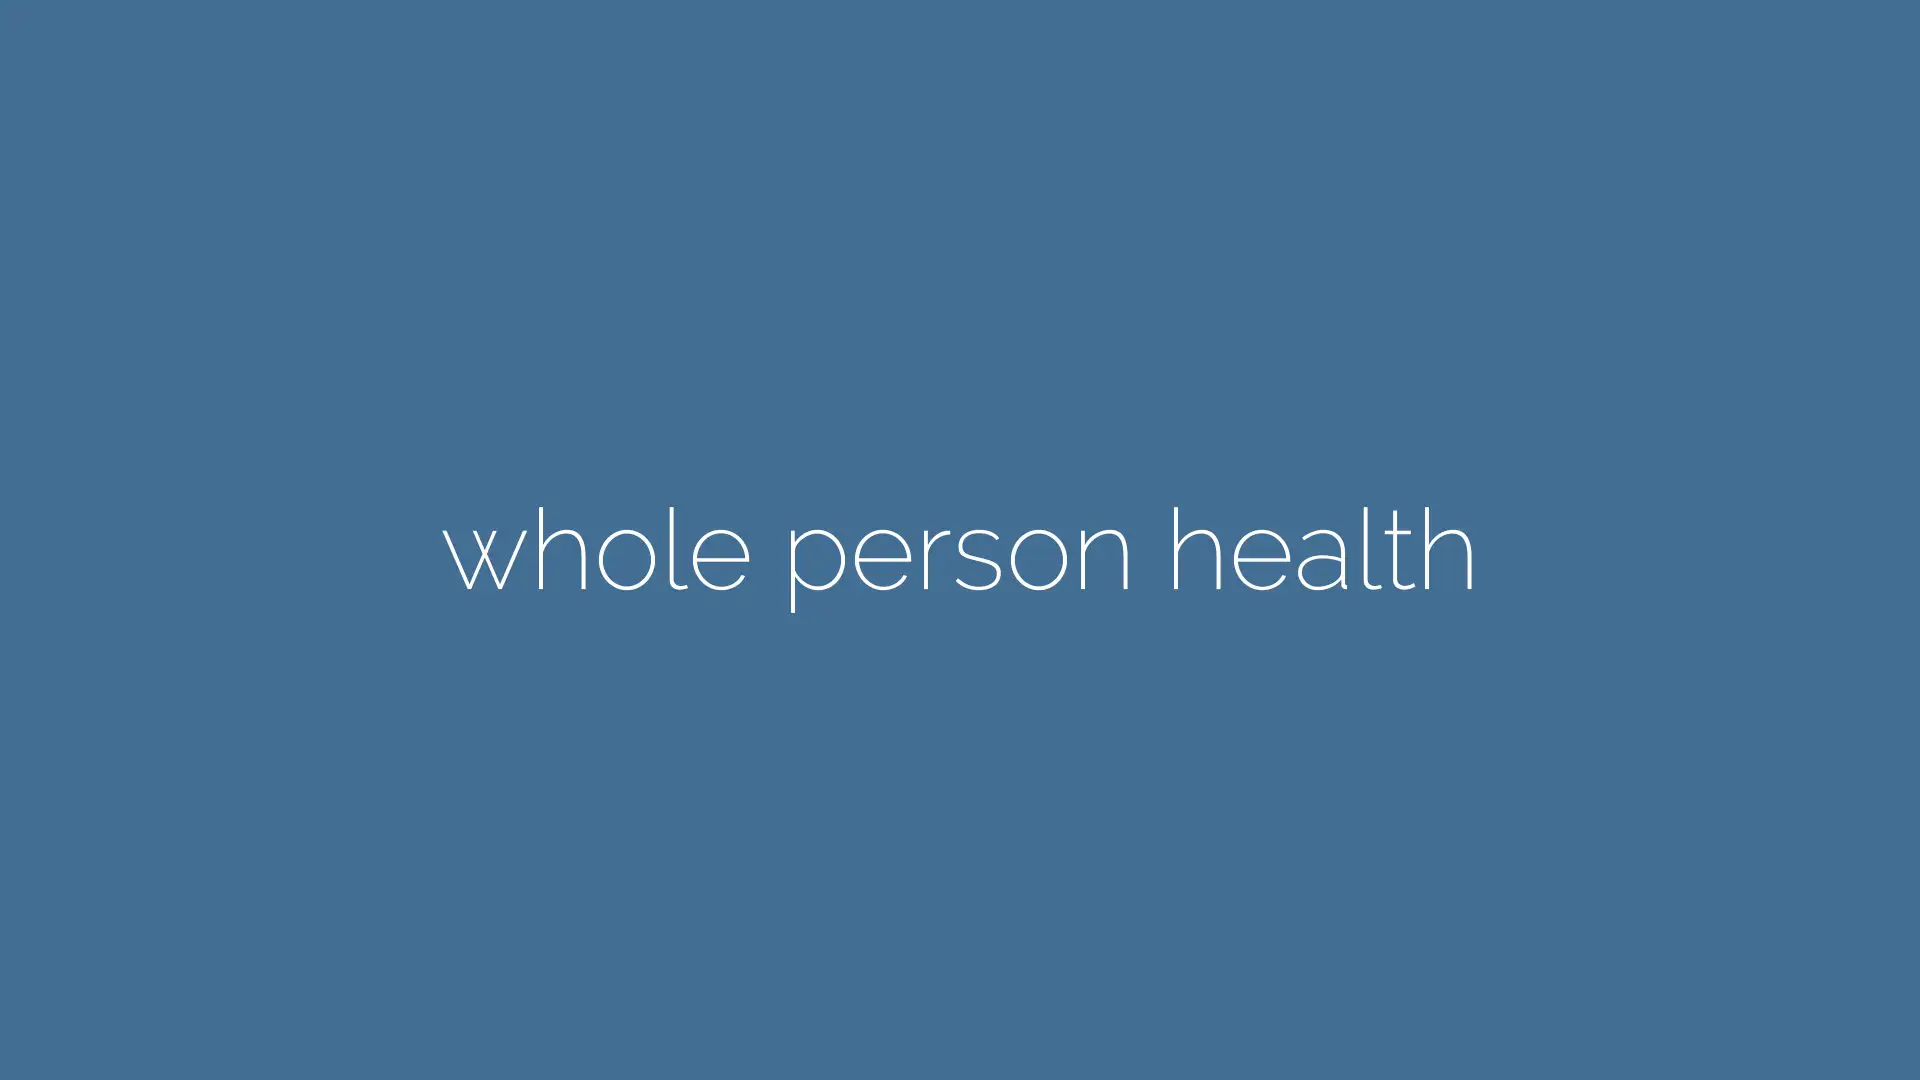 video poster frame for whole person health